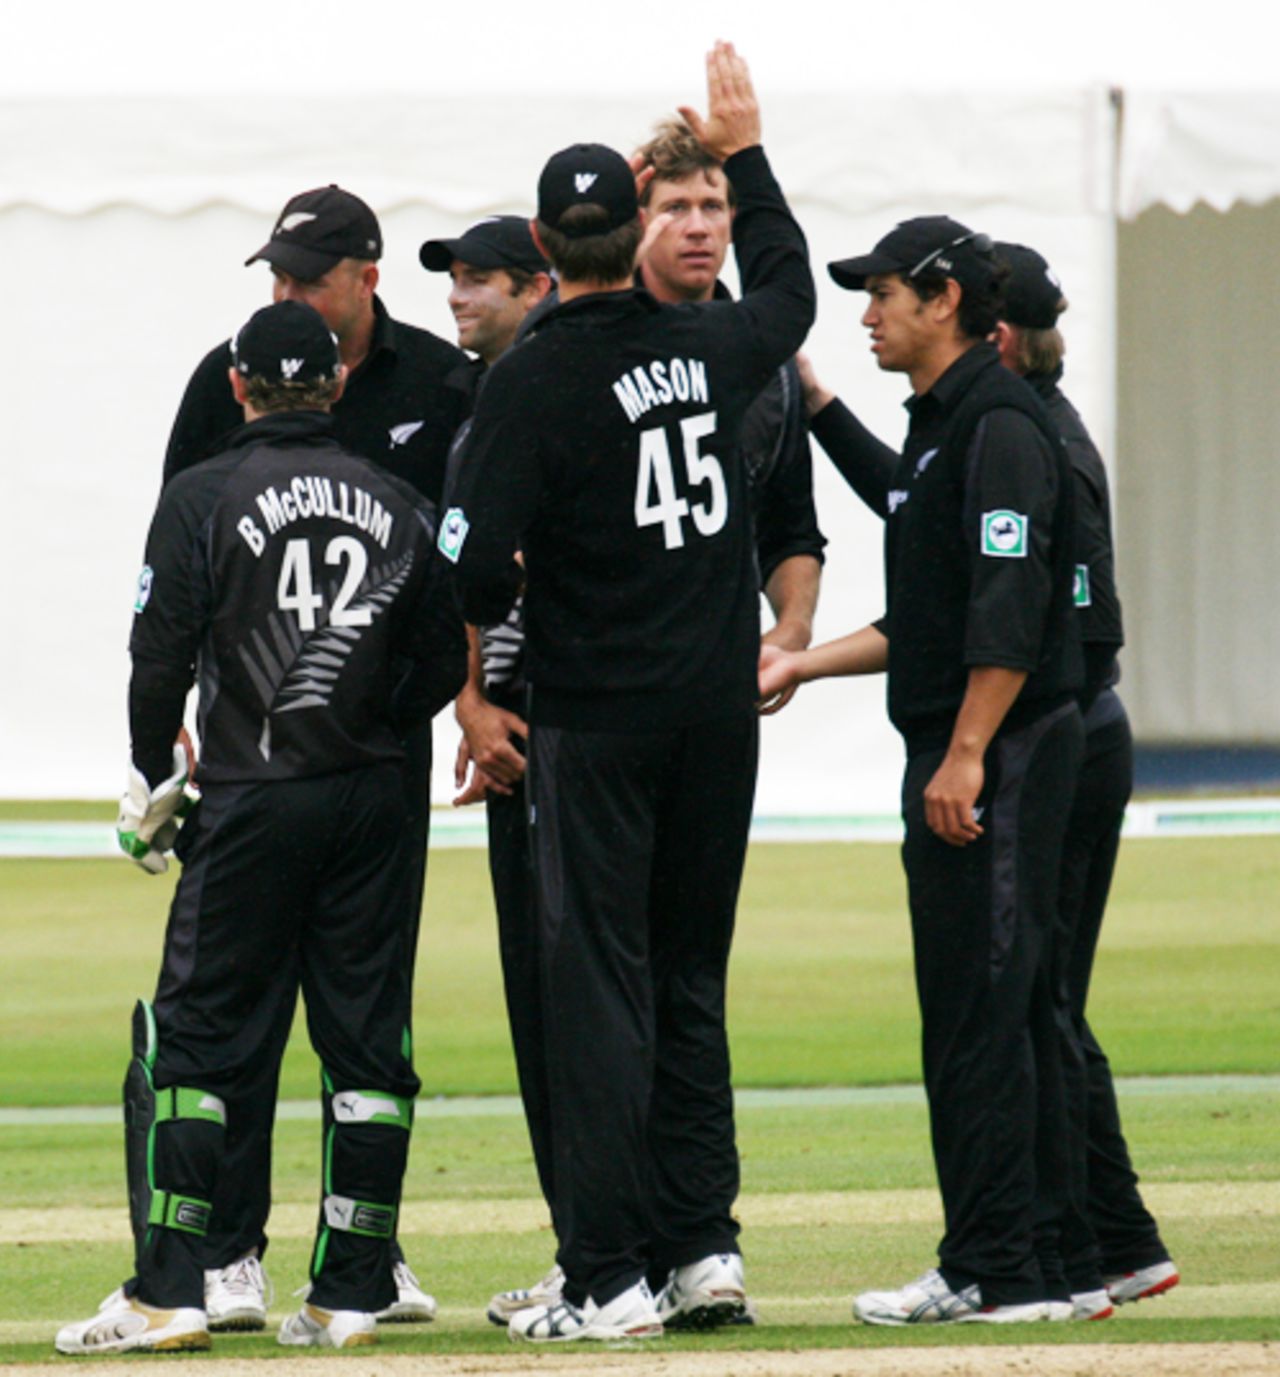 Jacob Oram and his team-mates celebrate a wicket, Scotland v New Zealand, Tri-series, Aberdeen, July 3, 2008